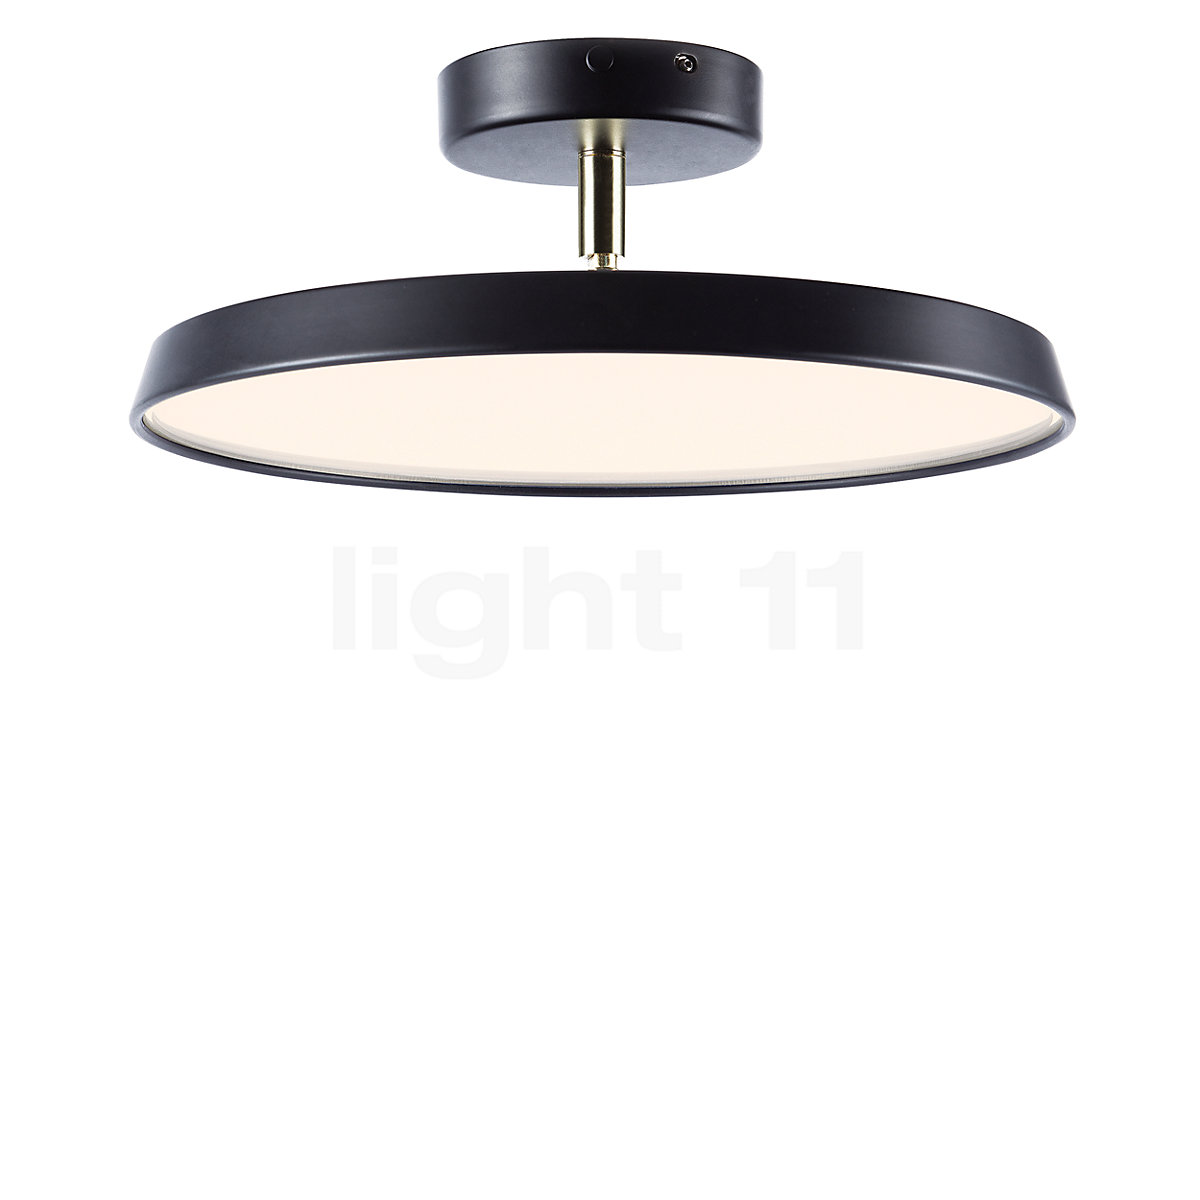 Buy Design for the People Pro Light at Ceiling Kaito LED